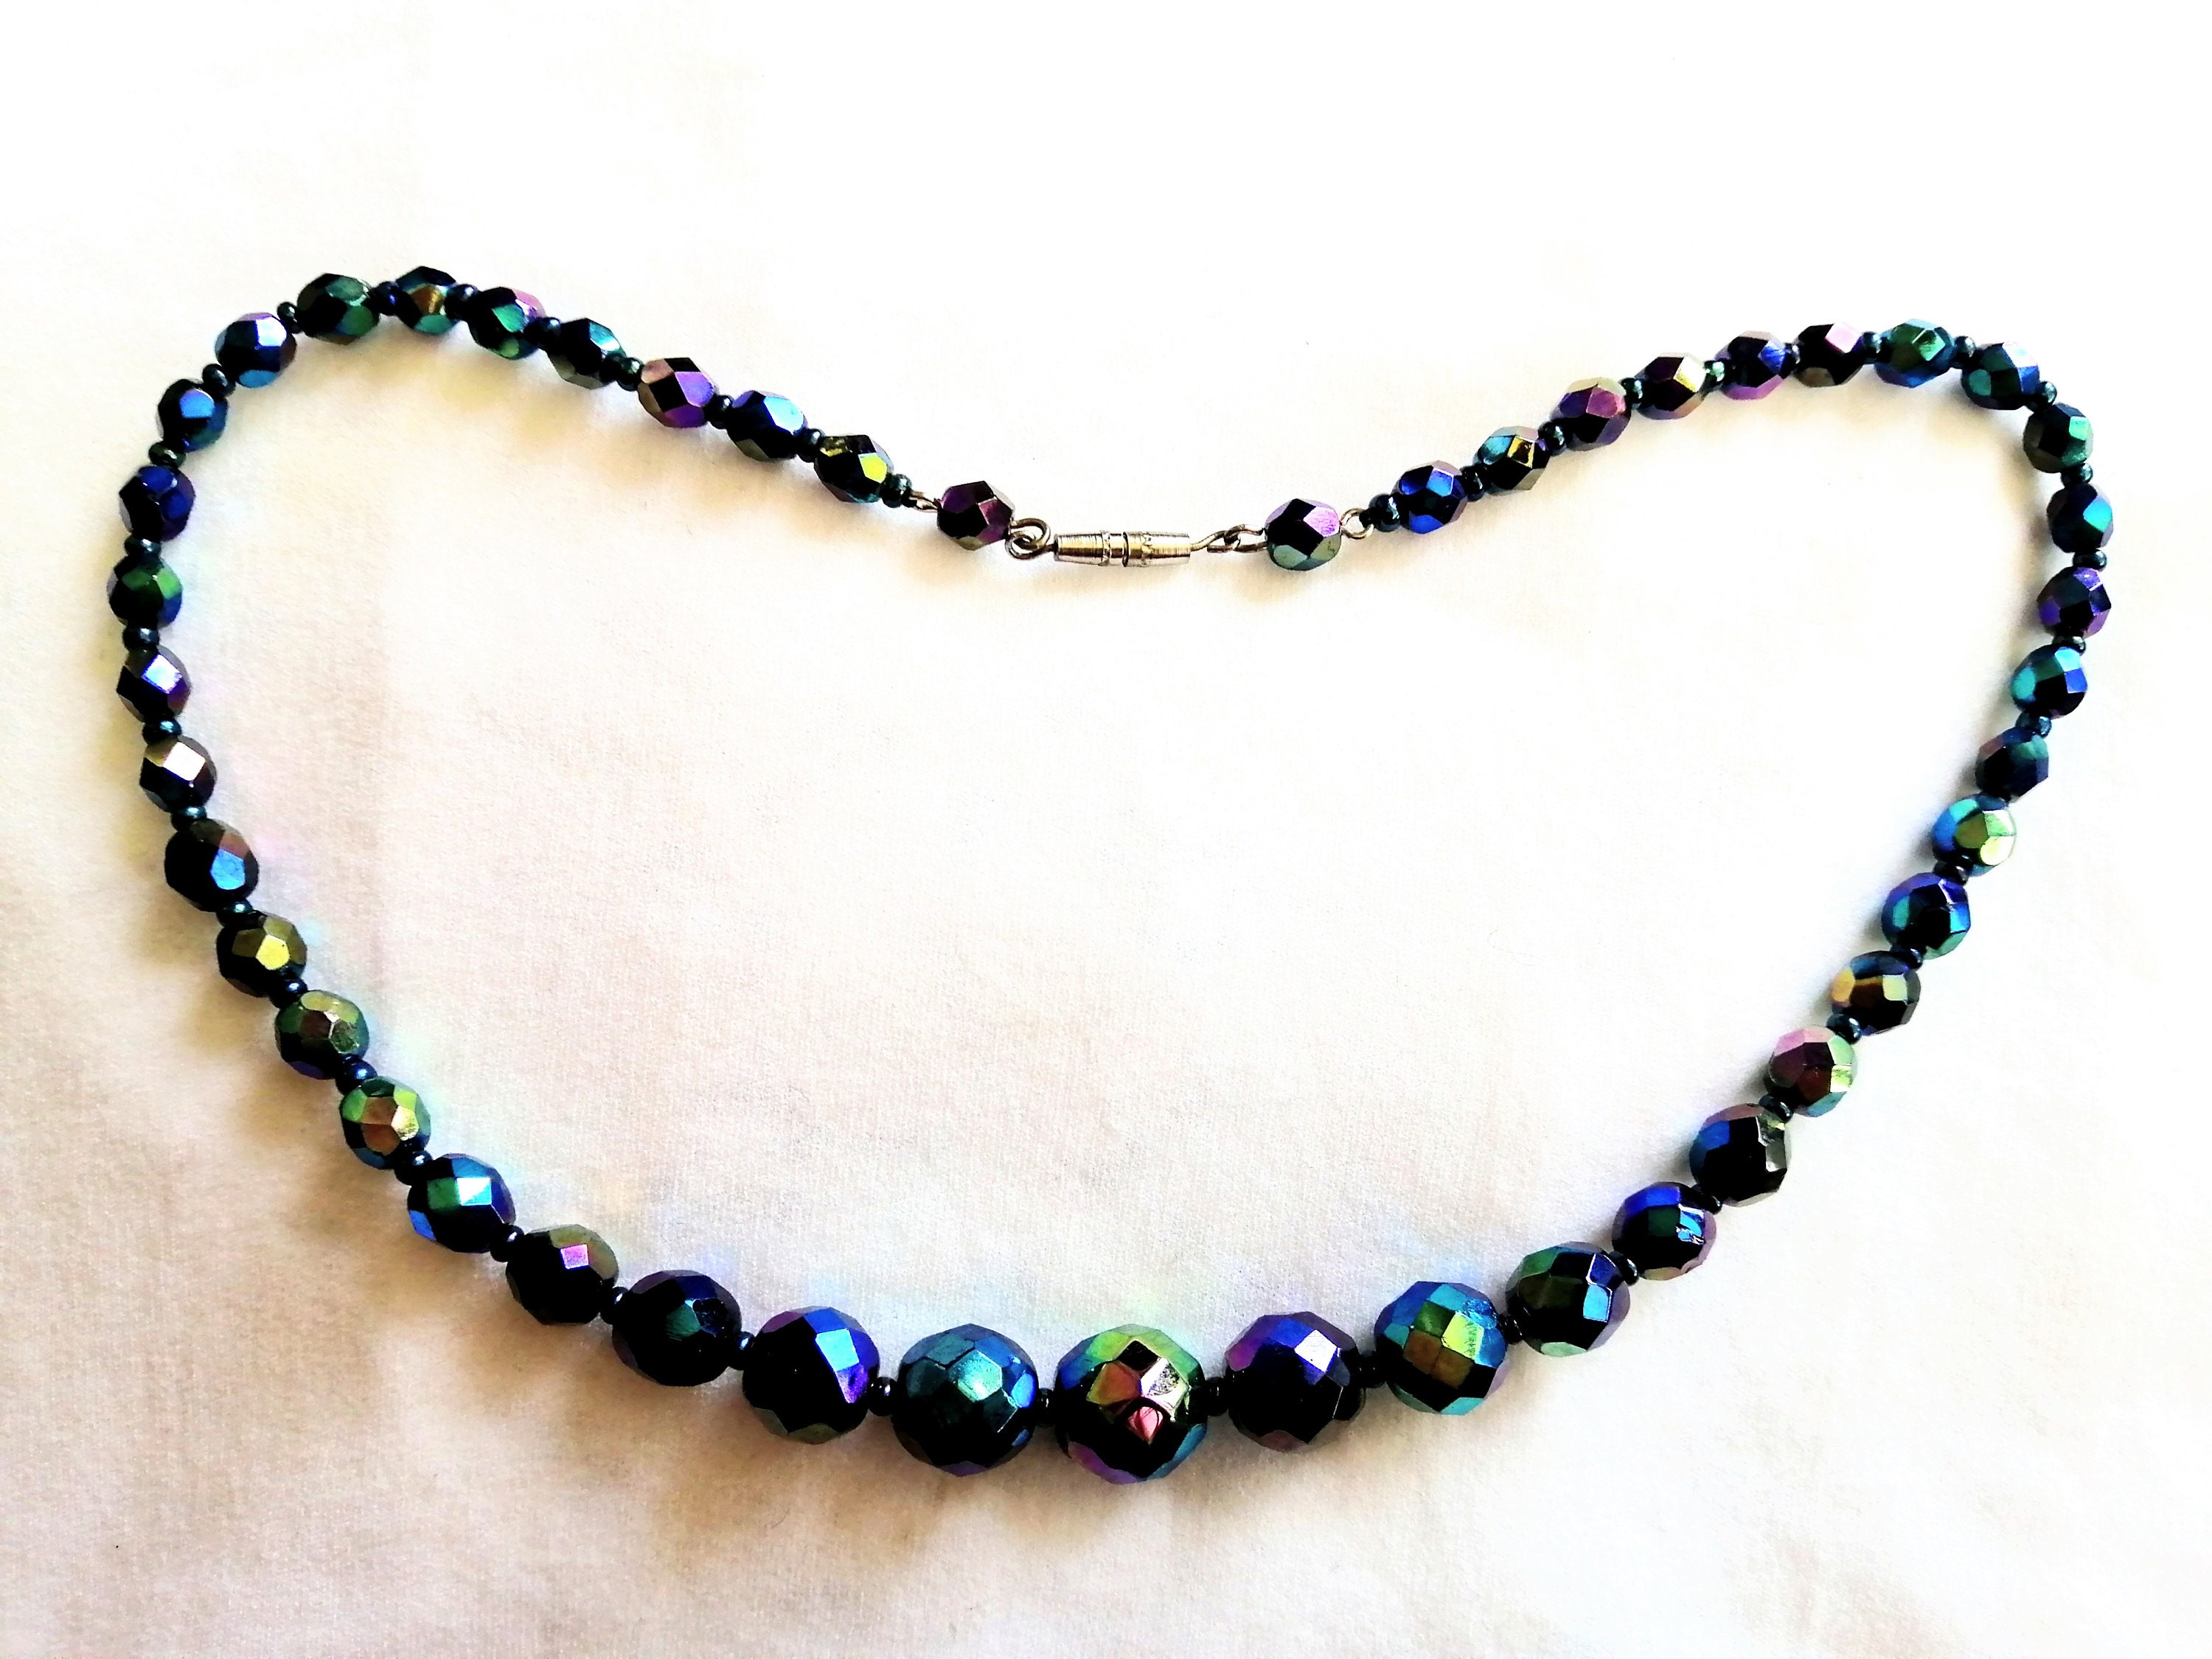 Seed Bead Necklaces for Women, Small Beaded Necklace, Dainty